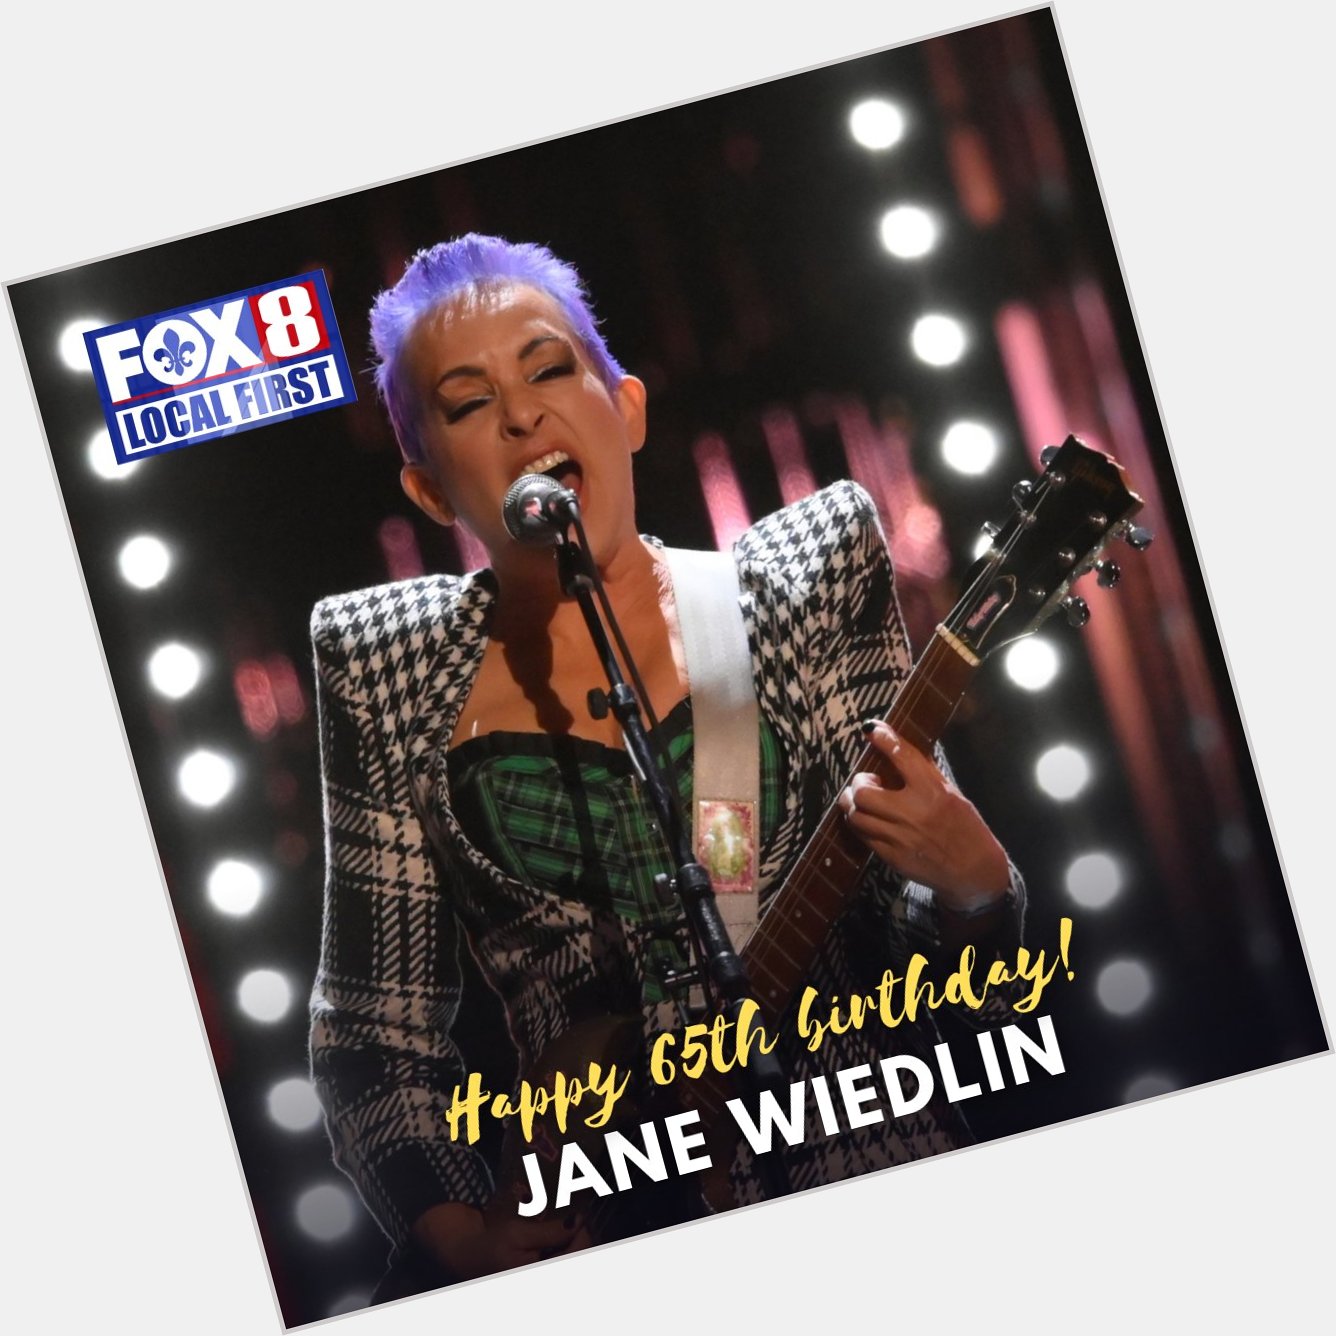 FOX8NOLA: Happy birthday to Jane Wiedlin! The guitarist and co-founder of The Go-Go\s turned 65 on Saturday! 